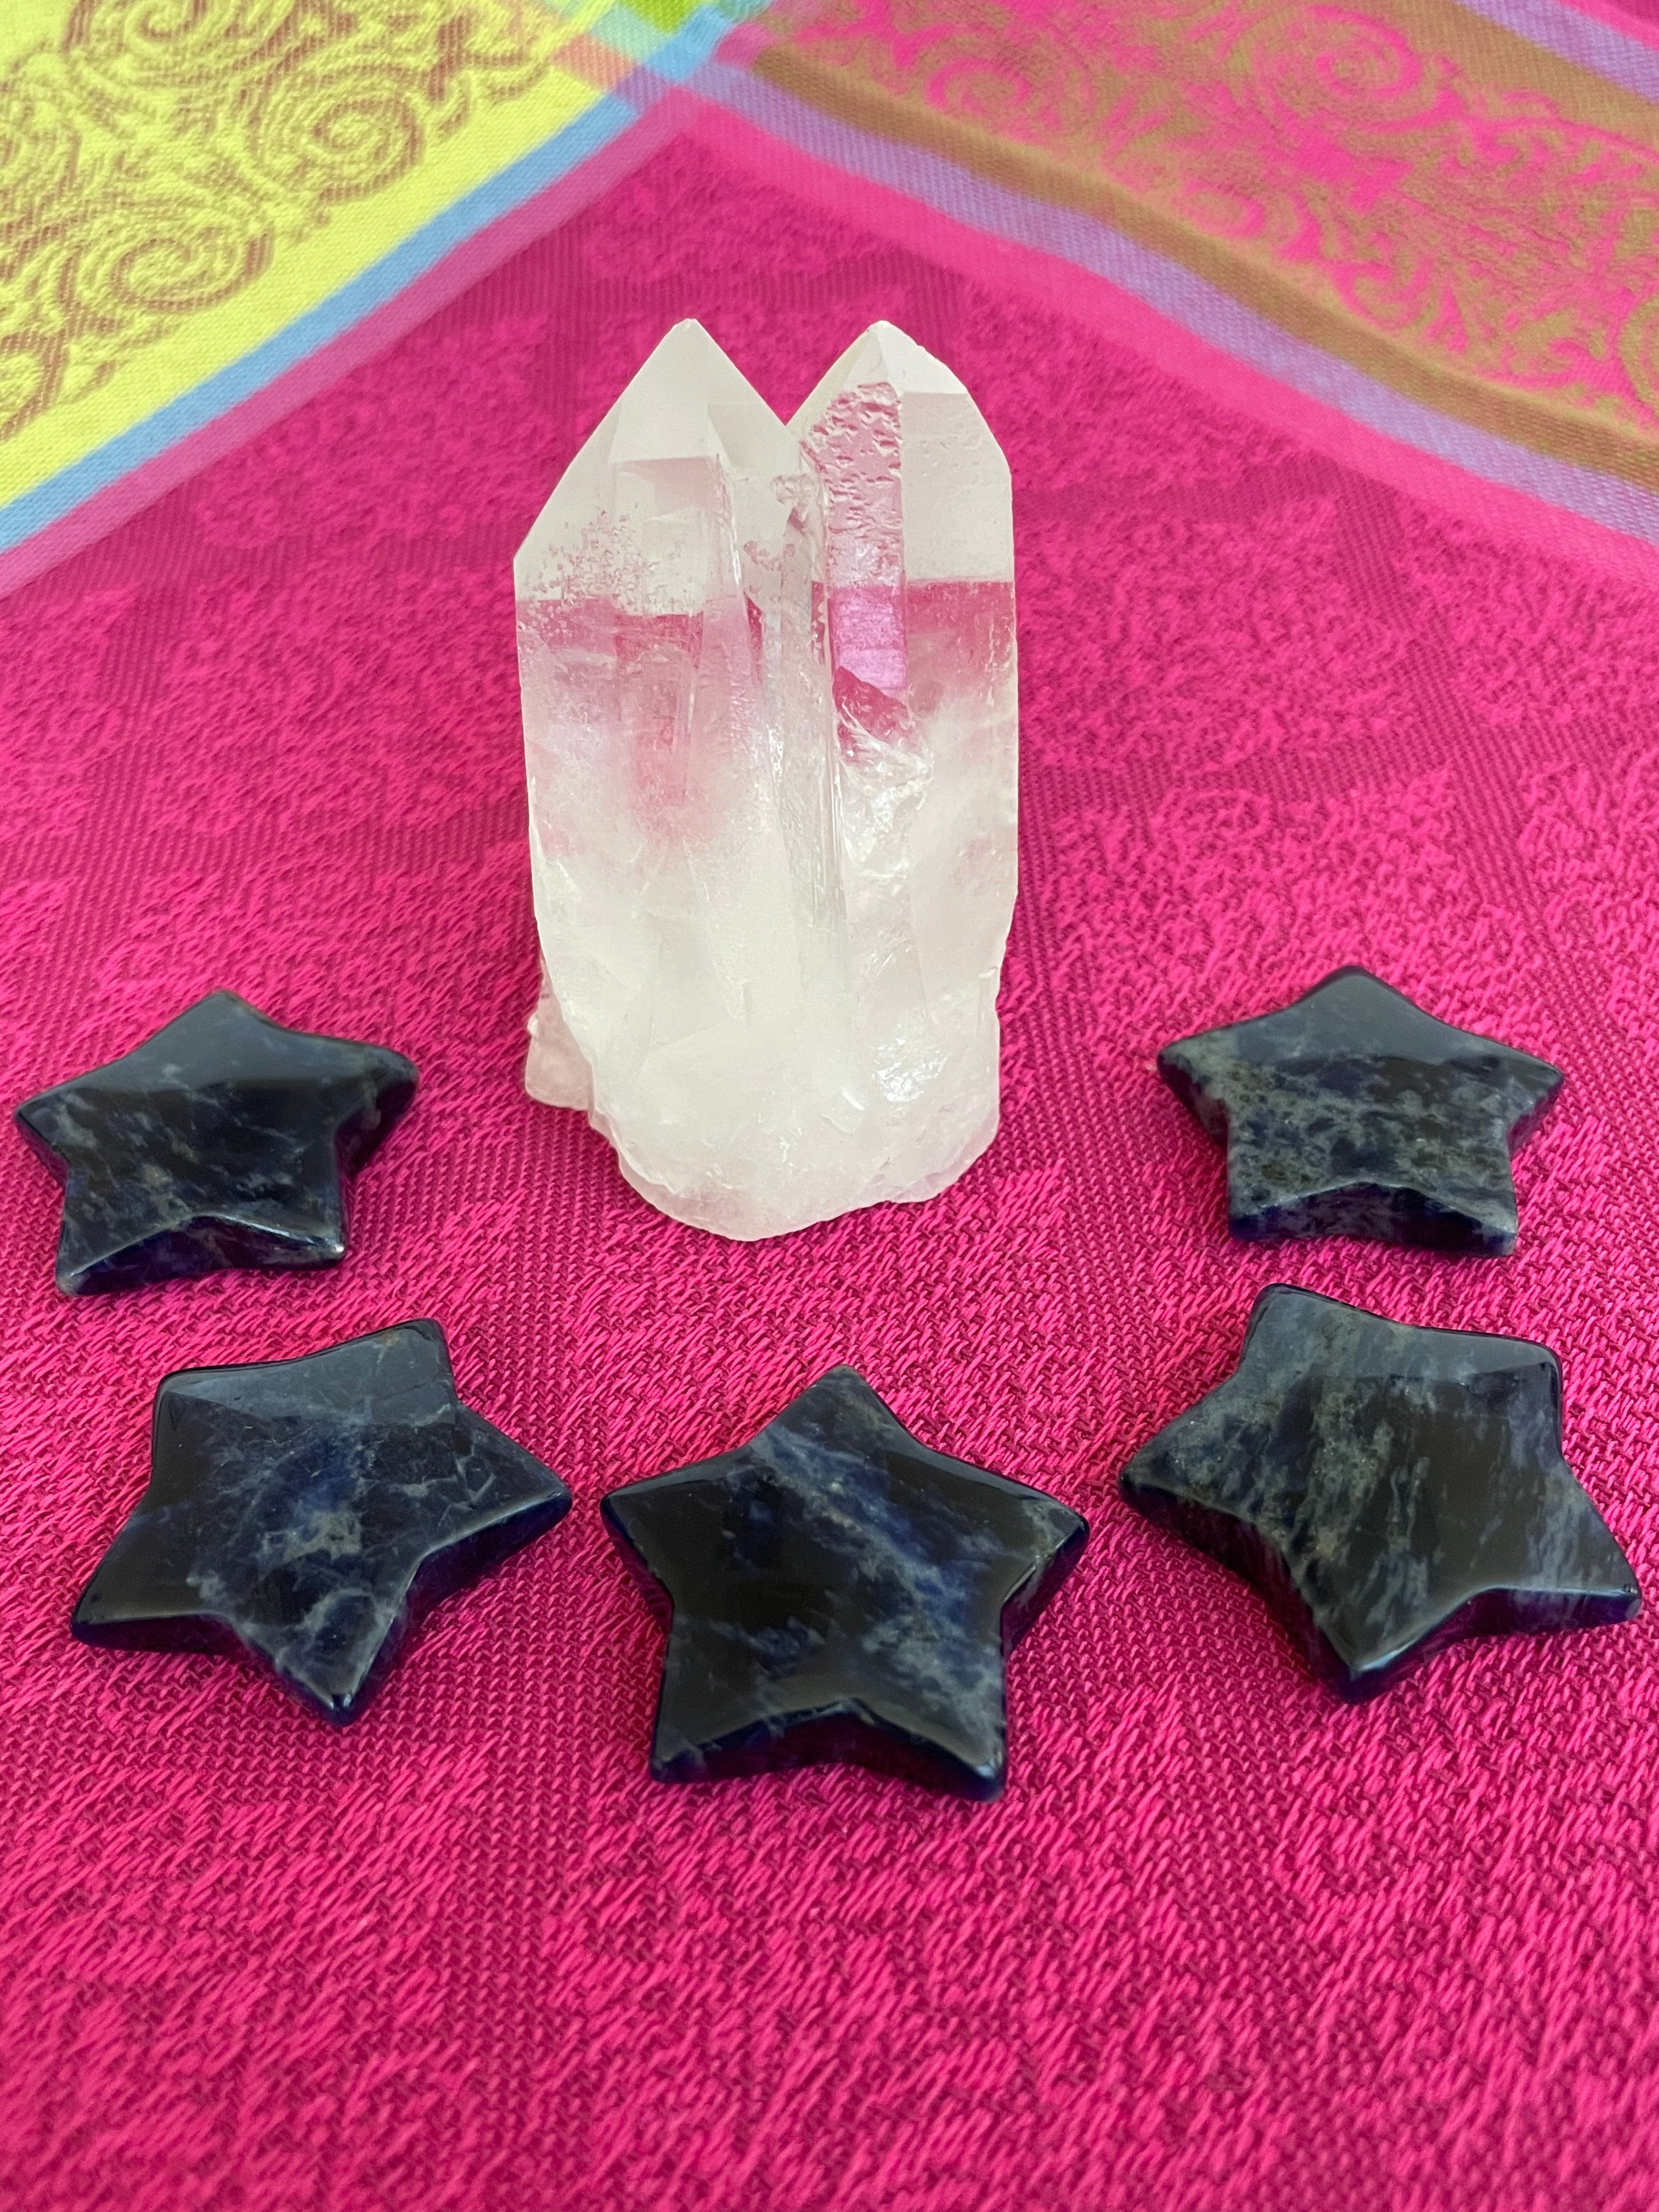 View of several sodalite stars. This powerful little sodalite crystal star can be used for meditation, healing, as an altar piece or as décor for any room in your home or office. Makes a wonderful gift too! Easy to slip right into your pocket so you can take the energy of sodalite wherever you go! Sodalite "Unites logic with intuition and opens spiritual perception" (Judy Hall). Approx. 1¼". Cost is $6 for one star. 